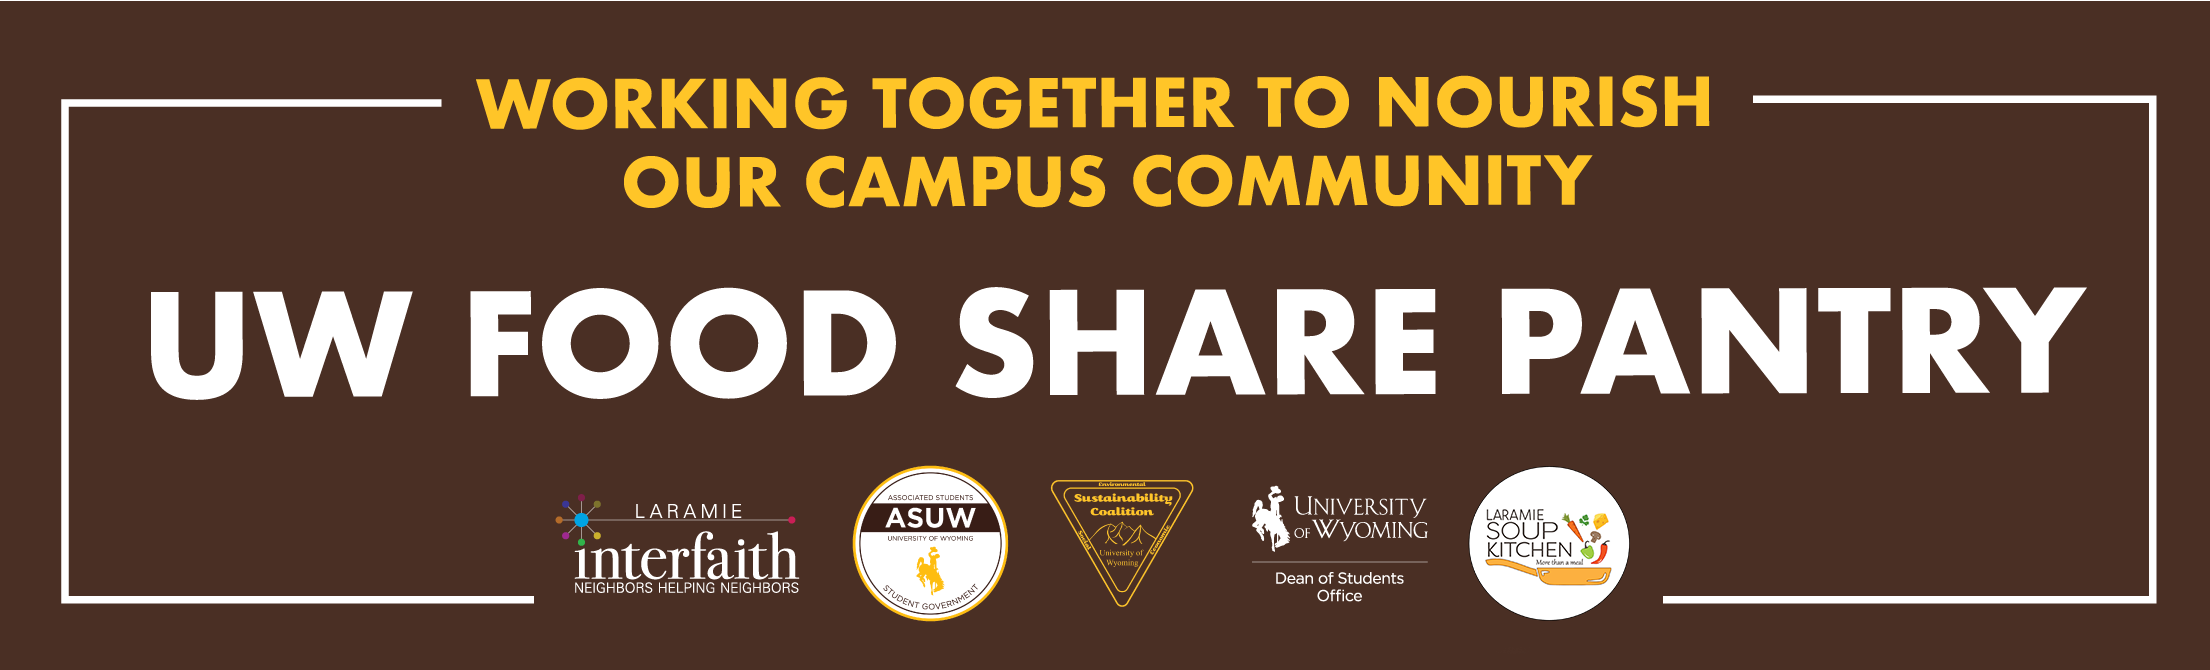 UW Food Share Pantry logo with community sponsor logos. Working together to nourish our campus community